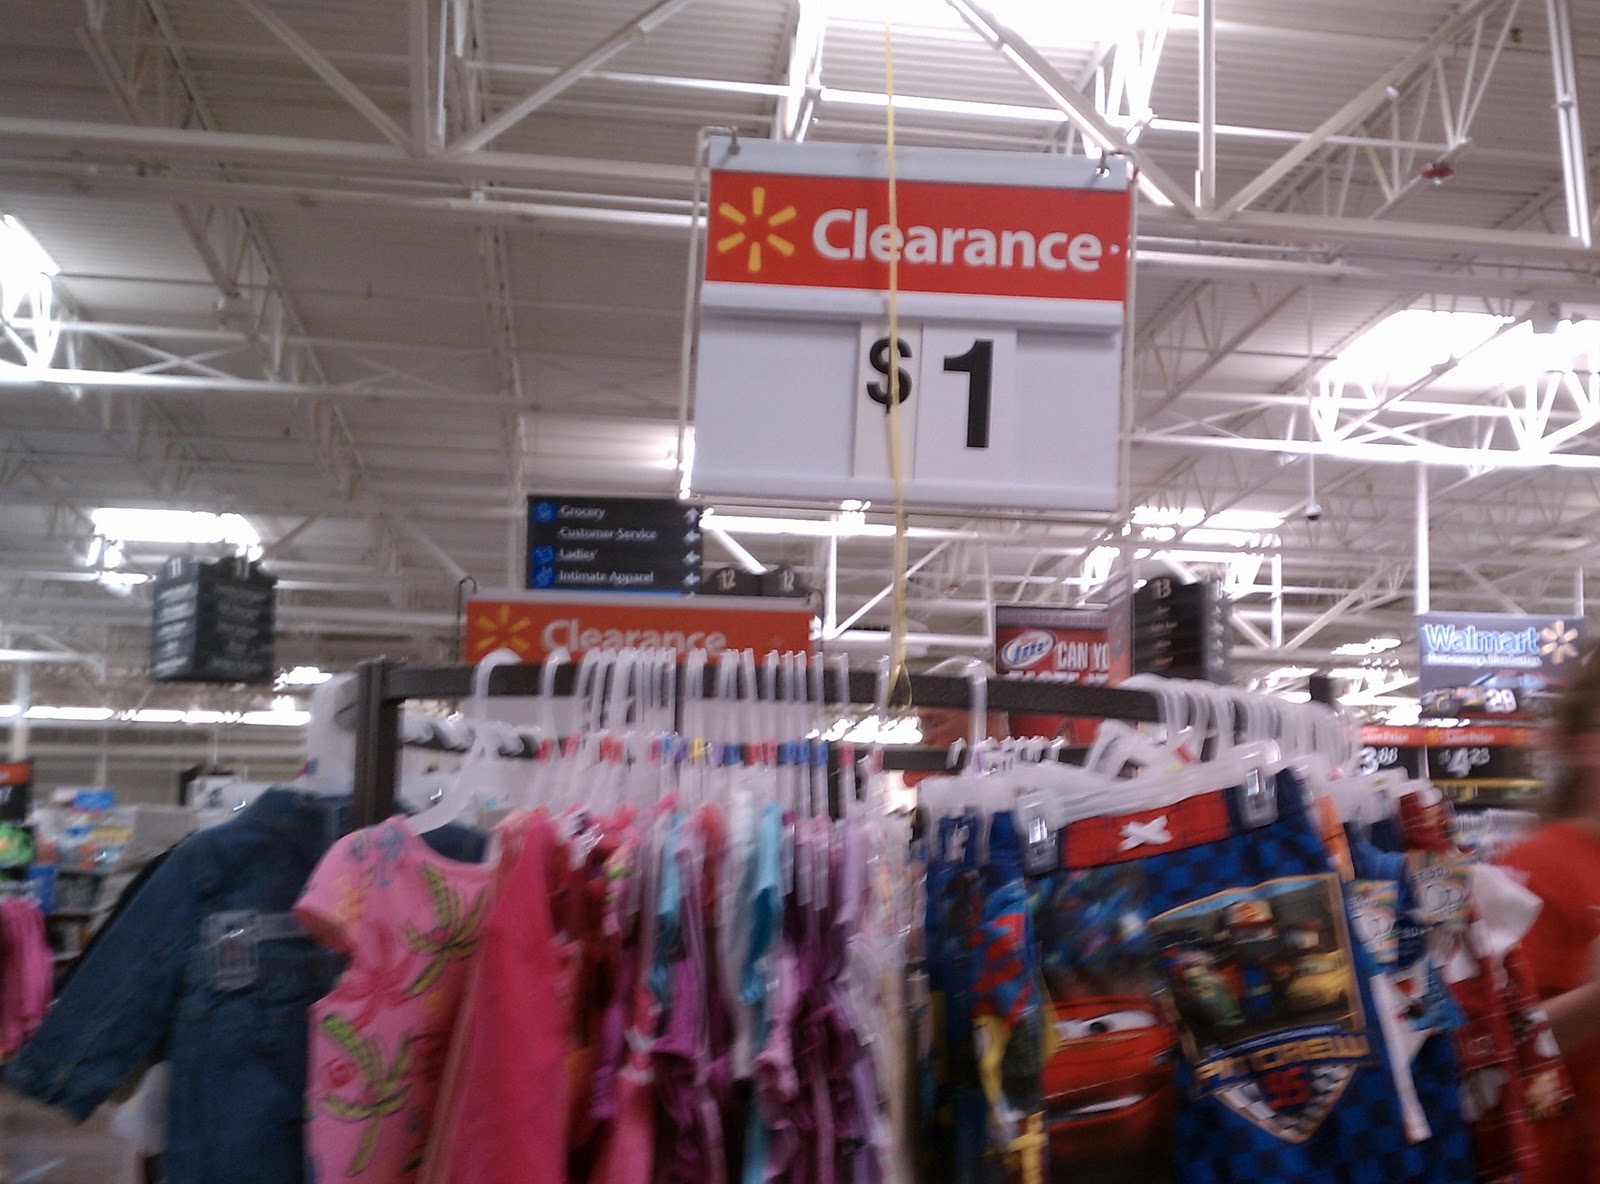 Arizona Shopping Secrets: Walmart Clearance Finds ~ $1 Apparel, Up to 90% off Toys & MORE